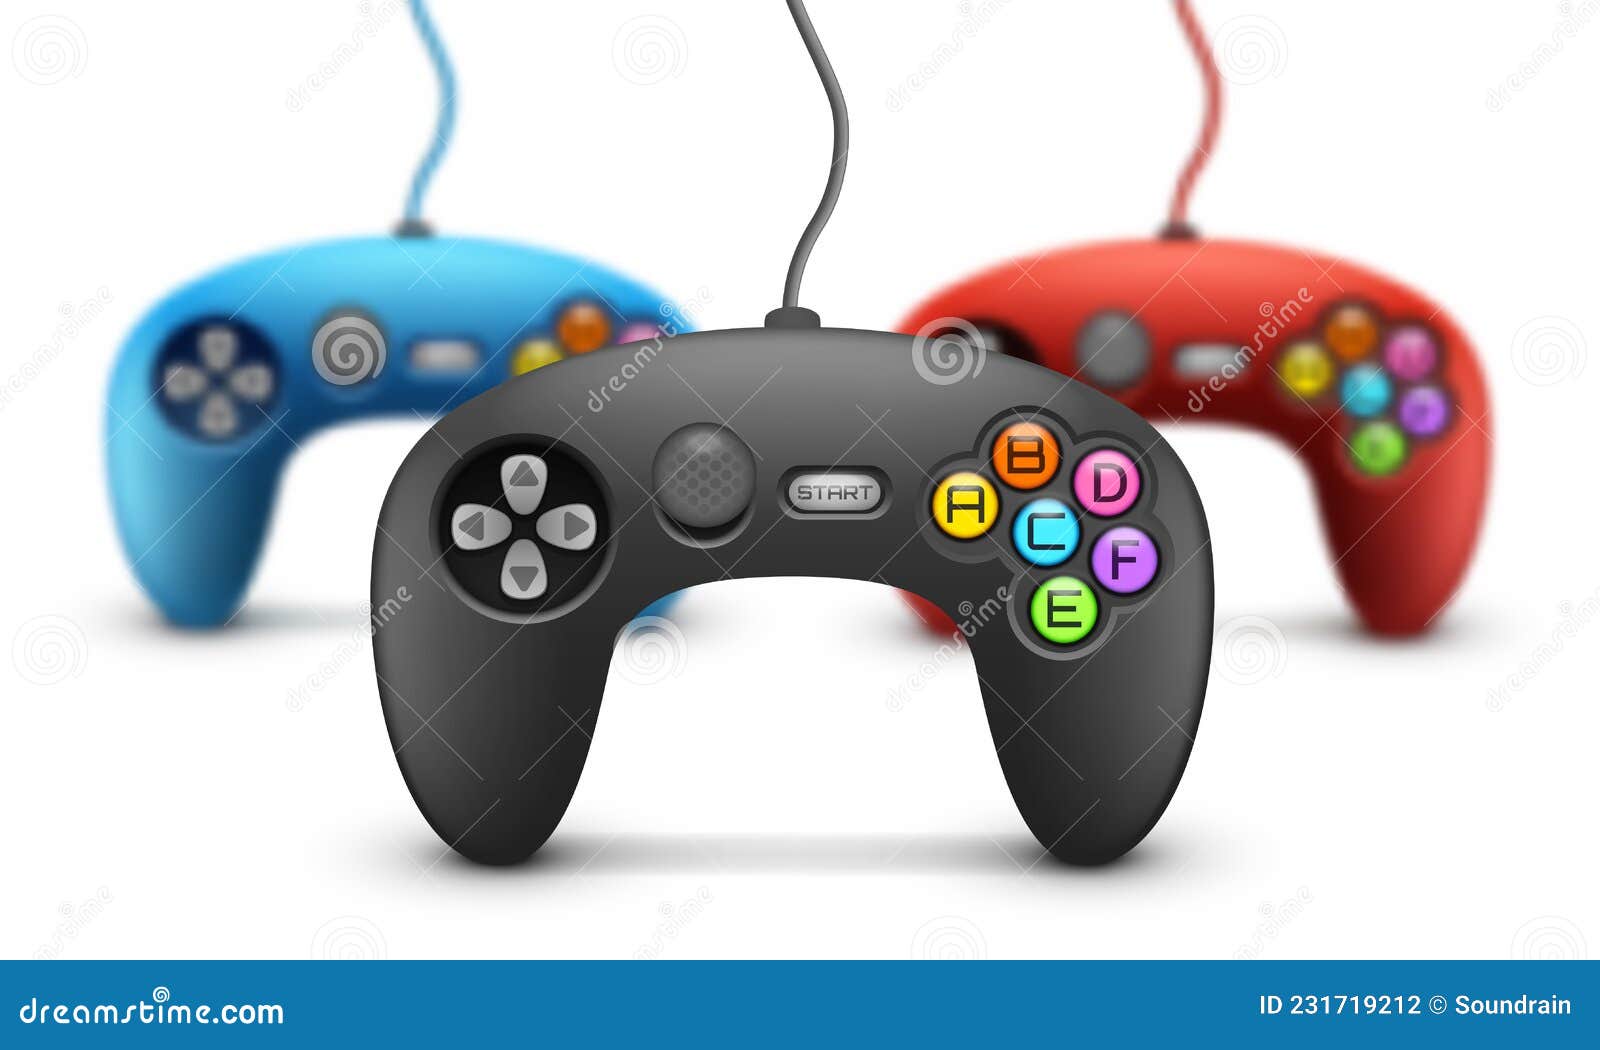 gamepad concept with the effect of blurring.